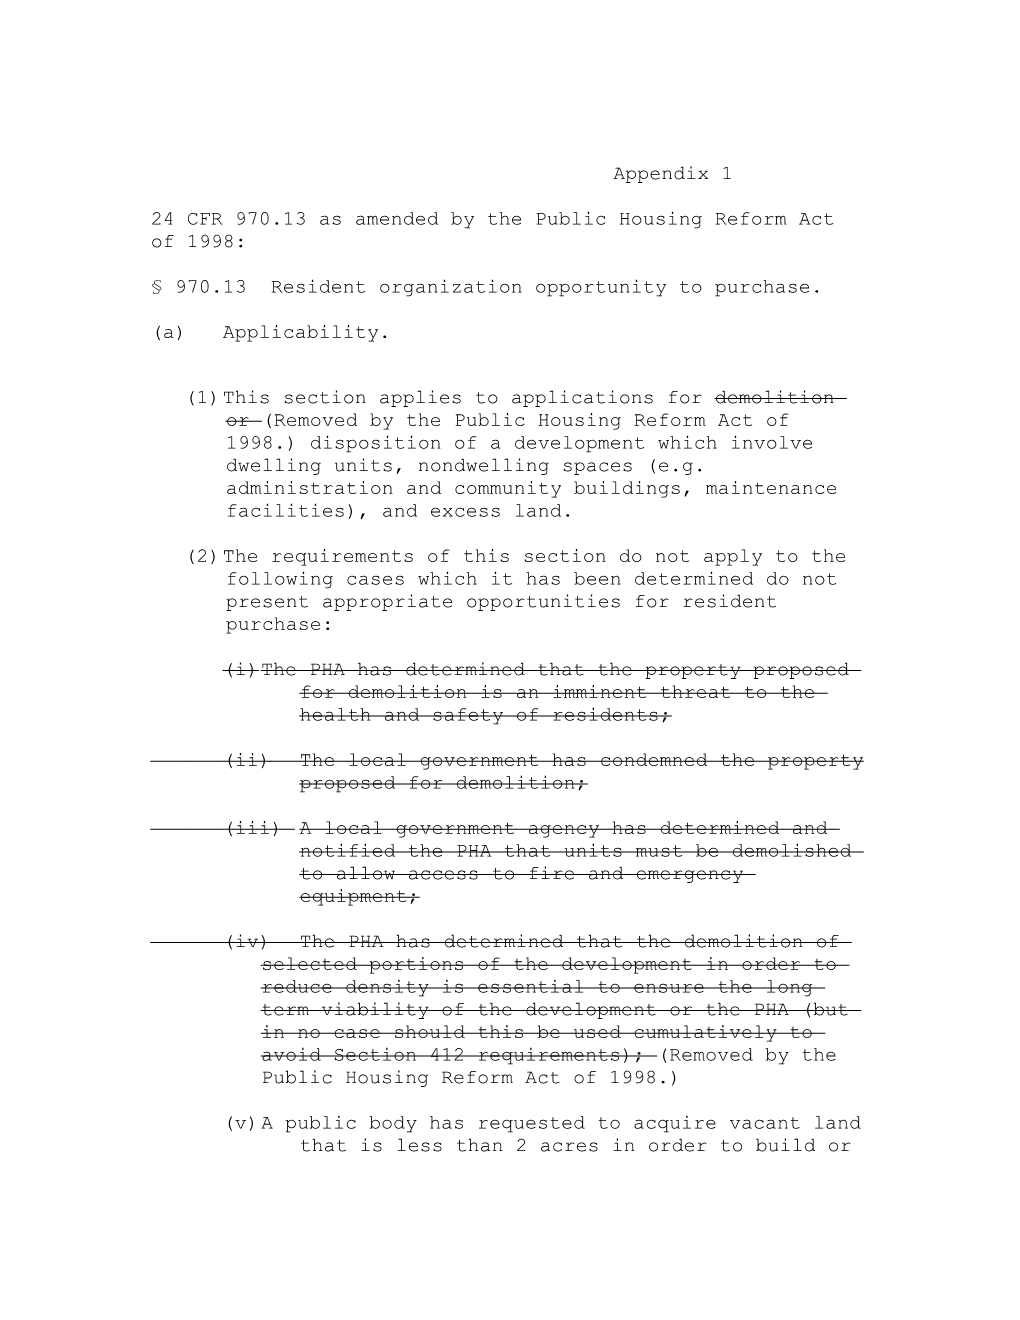 24 CFR 970.13 As Amended by the Public Housing Reform Act of 1998